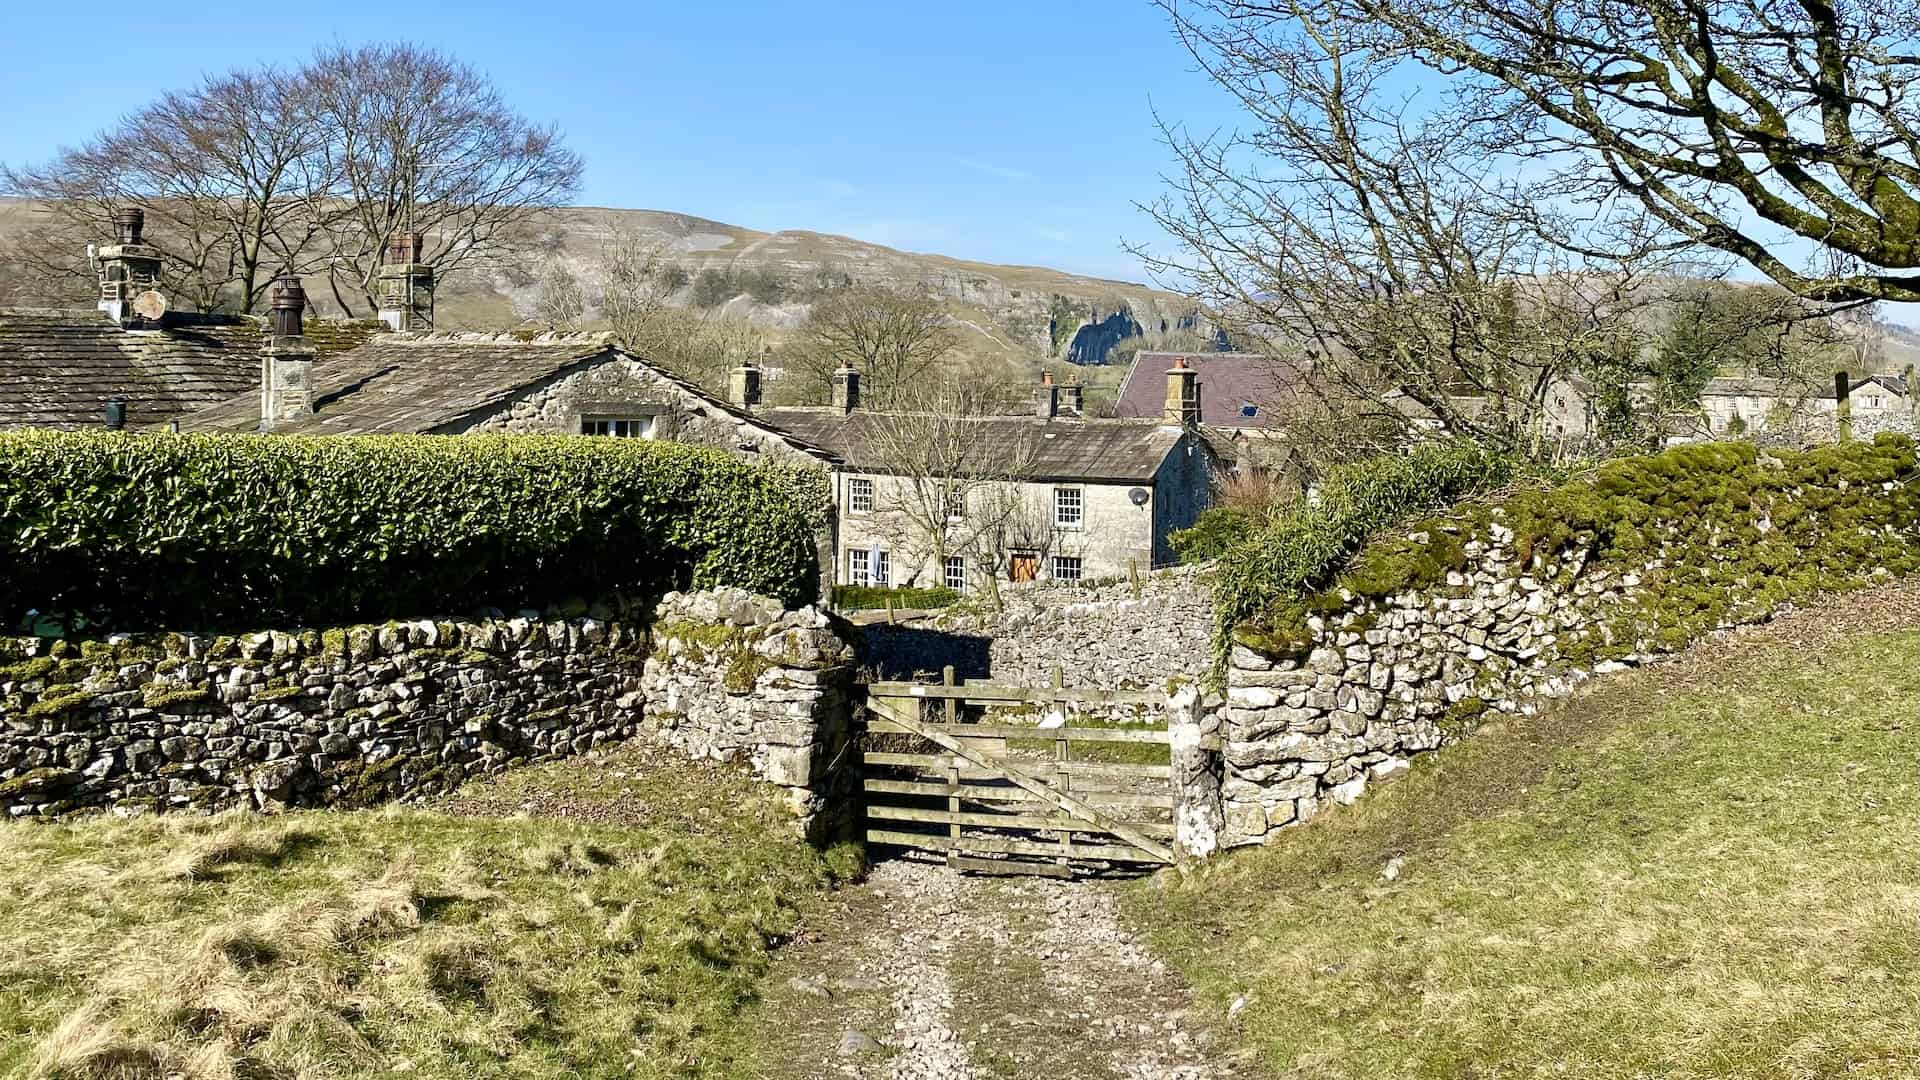 Maps and photographs of walking routes in Yorkshire, Cumbria and elsewhere in Northern England. Areas covered include the Lake District, North York Moors and Yorkshire Dales National Parks, and the Howardian Hills, Nidderdale and North Pennines AONBs (Areas of Outstanding Natural Beauty).